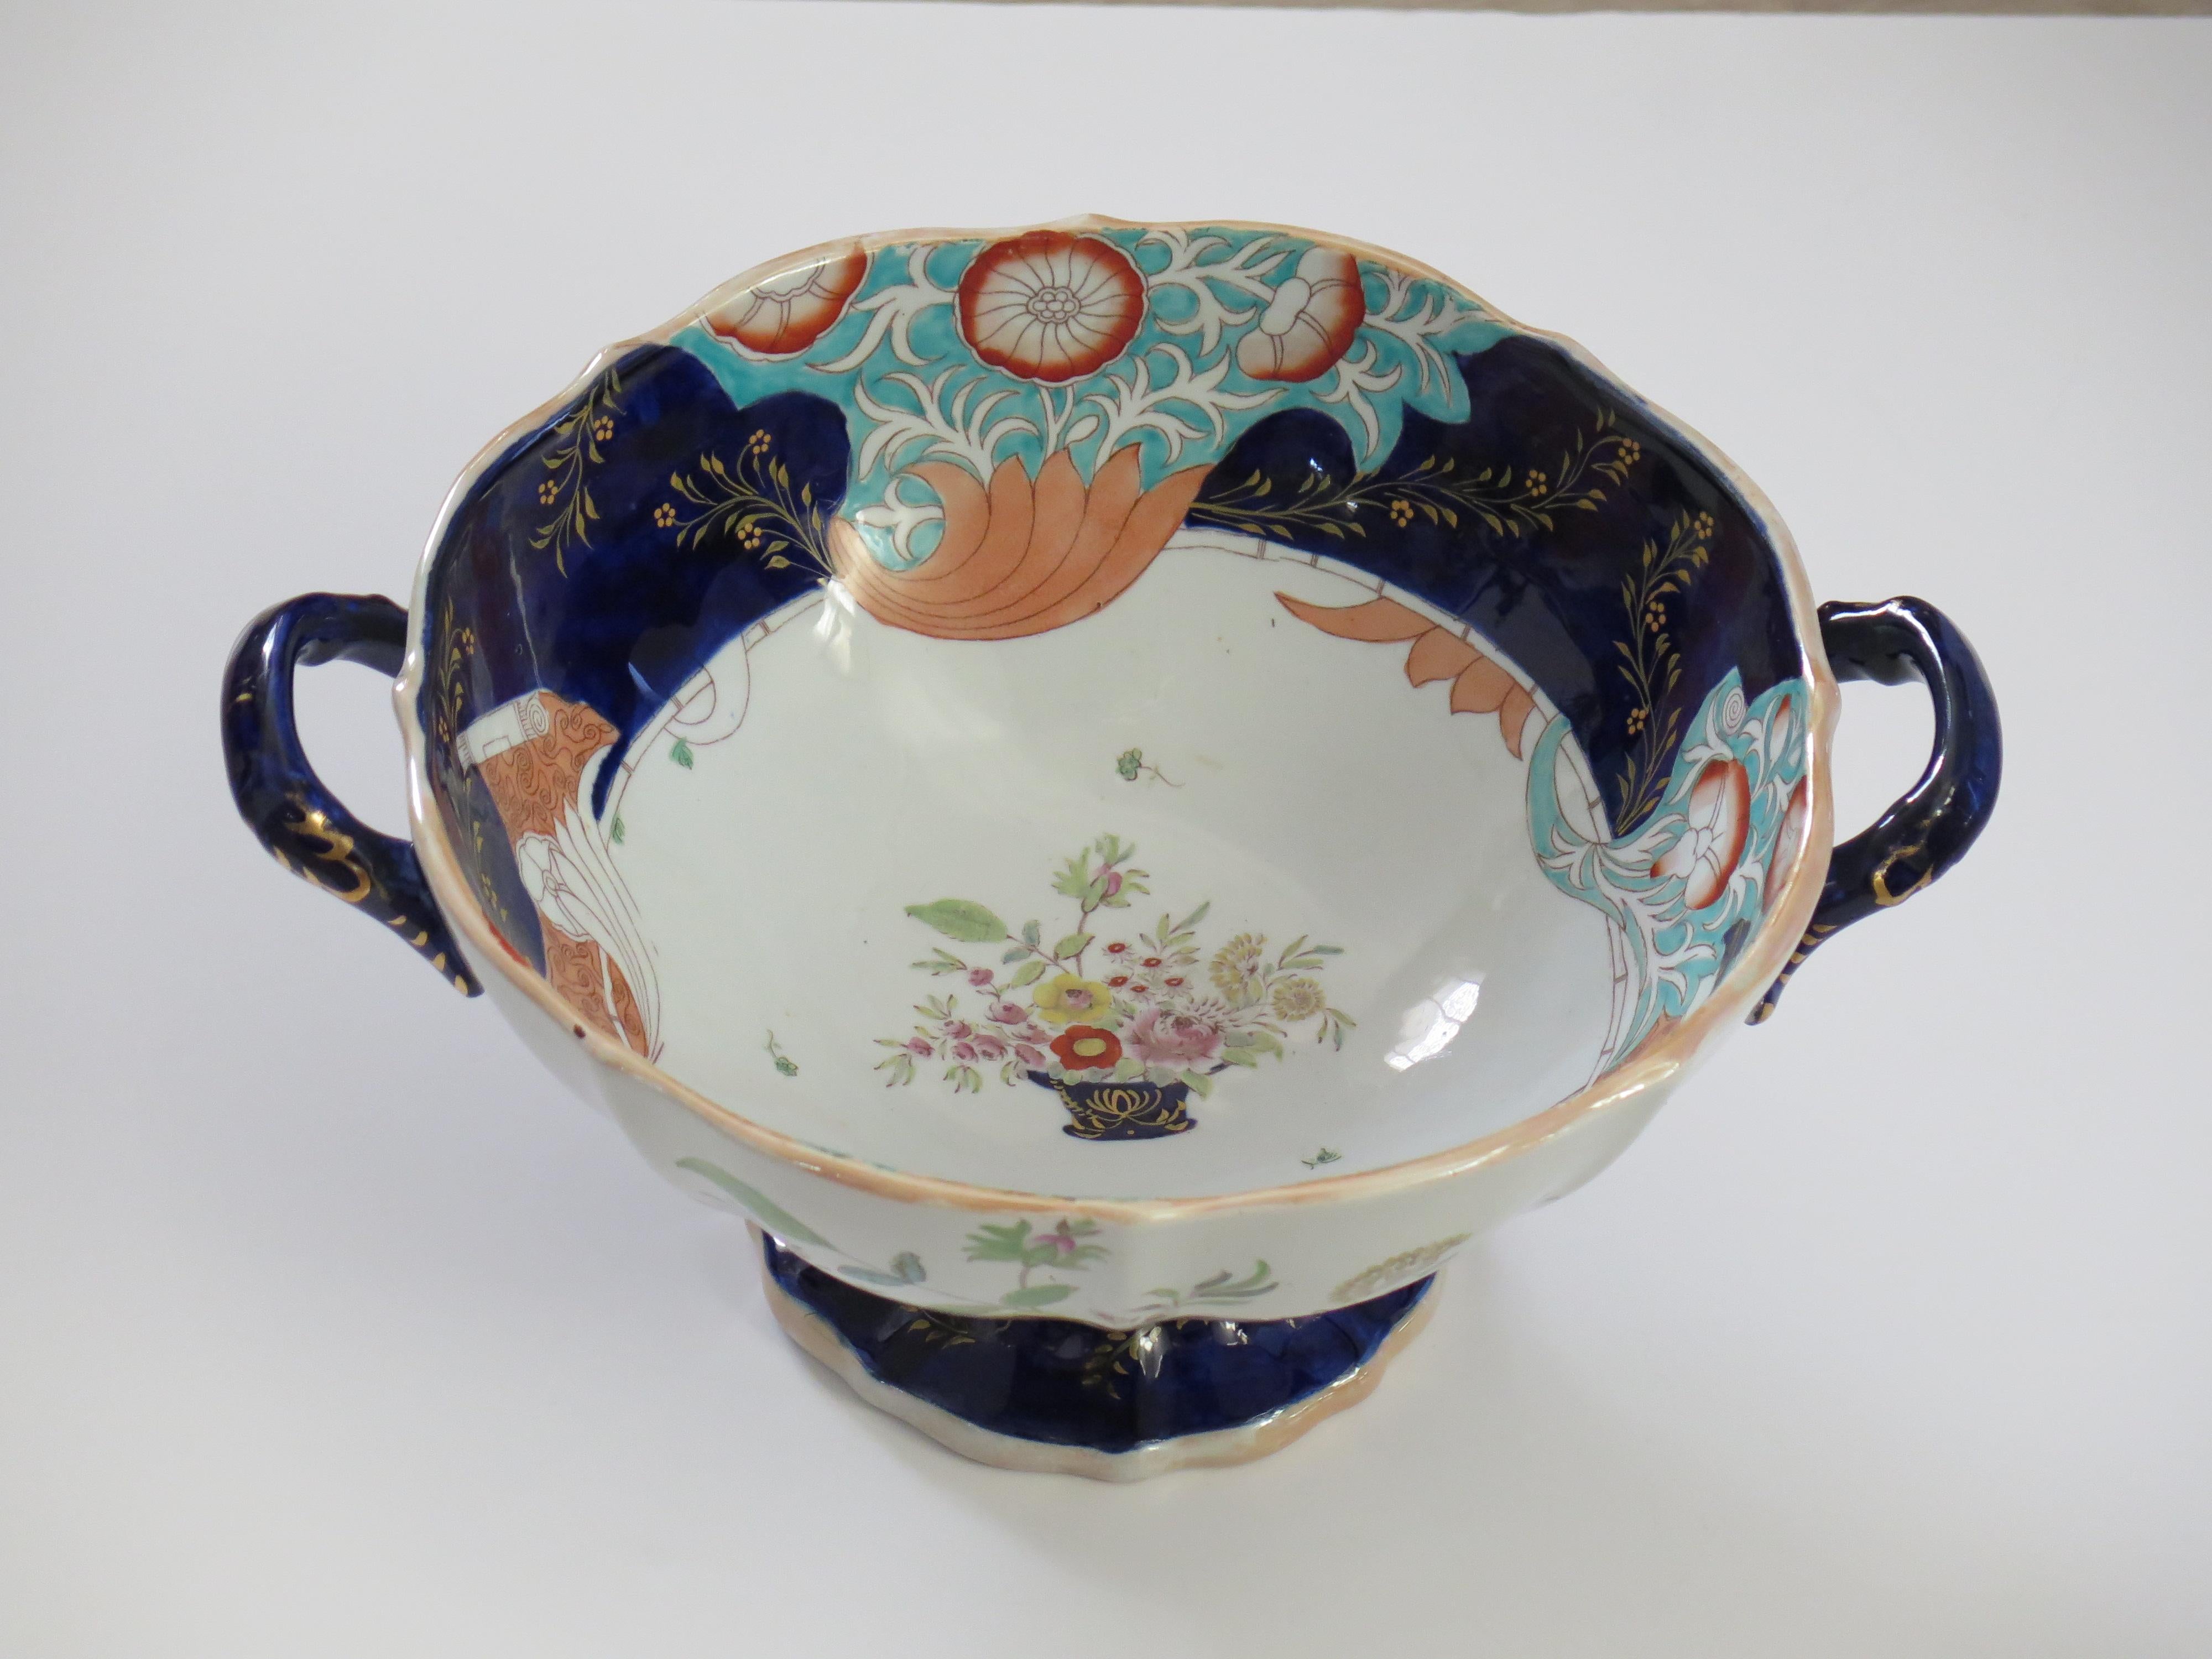 This is a Large twin Handled open Punch Bowl made by Mason's Ironstone in a beautiful pattern called: Curled Leaf and flower Basket, made in the early 19th century, William 1Vth period, circa 1835 to 1840..

Large Mason's Punch bowls in this shape